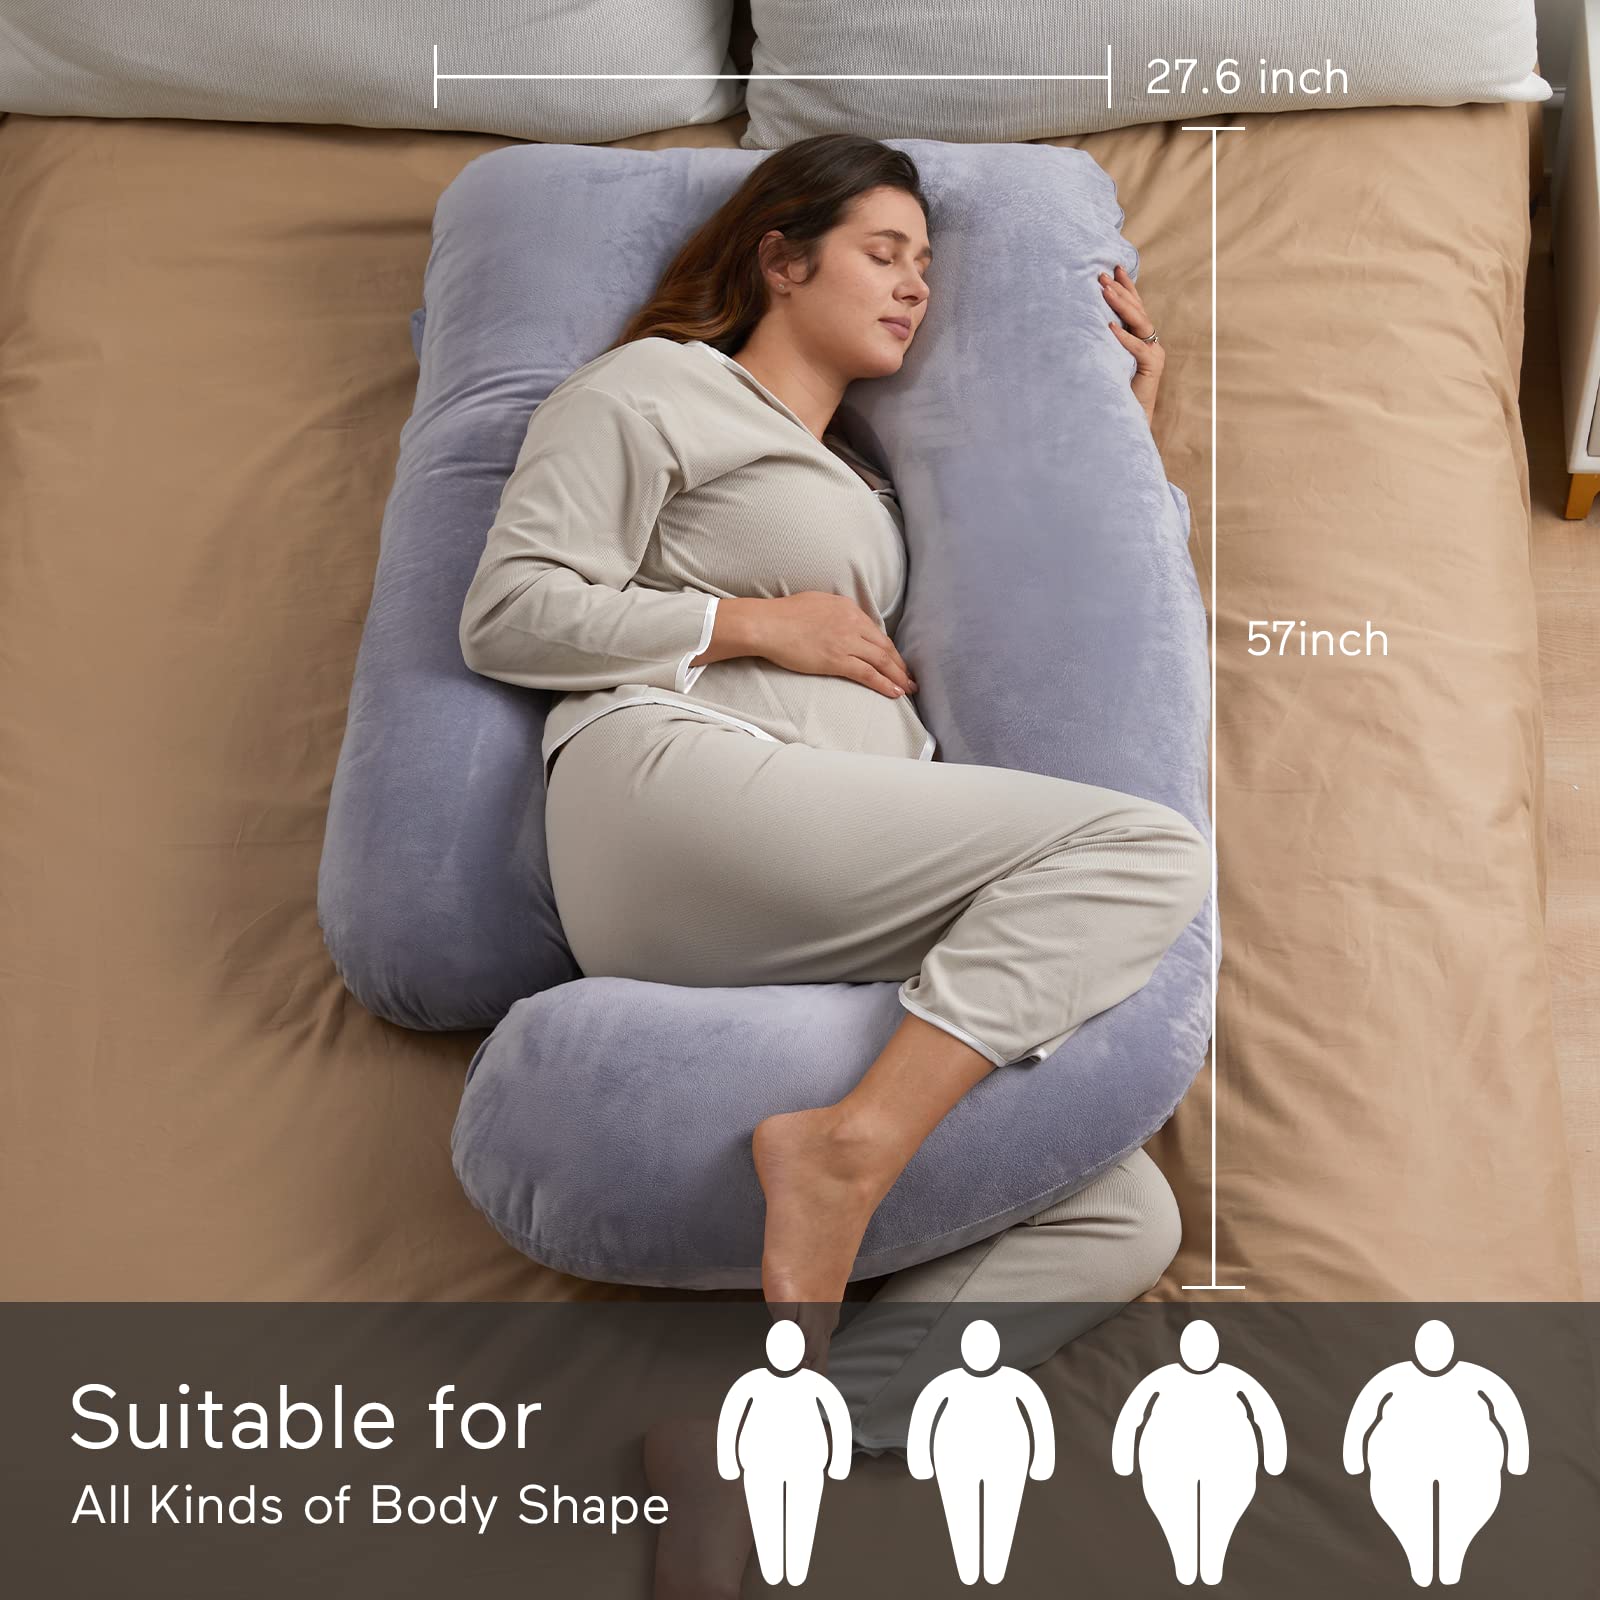 Momcozy Pregnancy Pillows, U Shaped Full Body Maternity Pillow with Removable Cover, 57 Inch Pregnancy Pillows for Sleeping, Grey